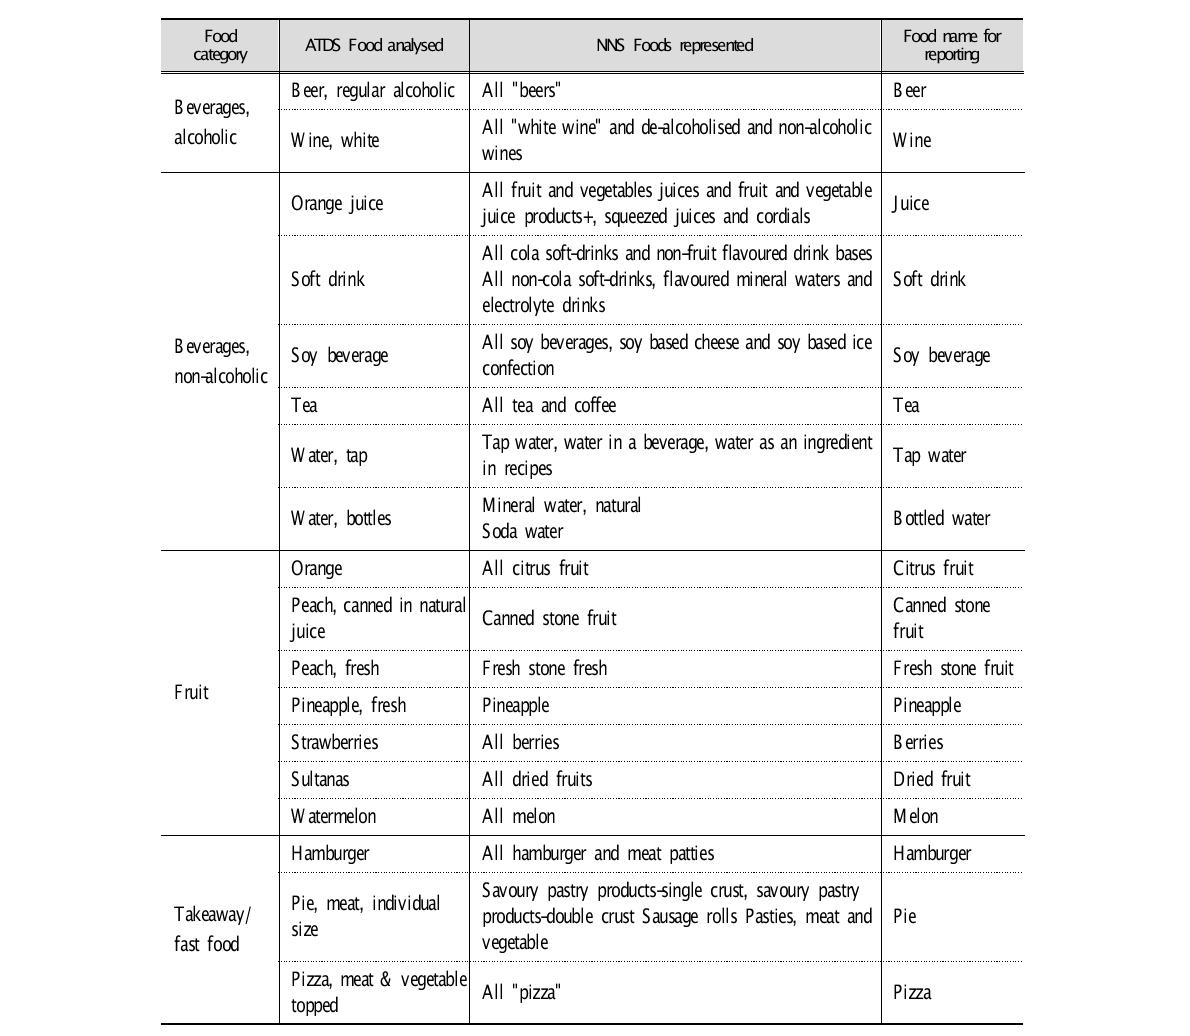 Food translations/mapping used for the dietary intake estimates (example)